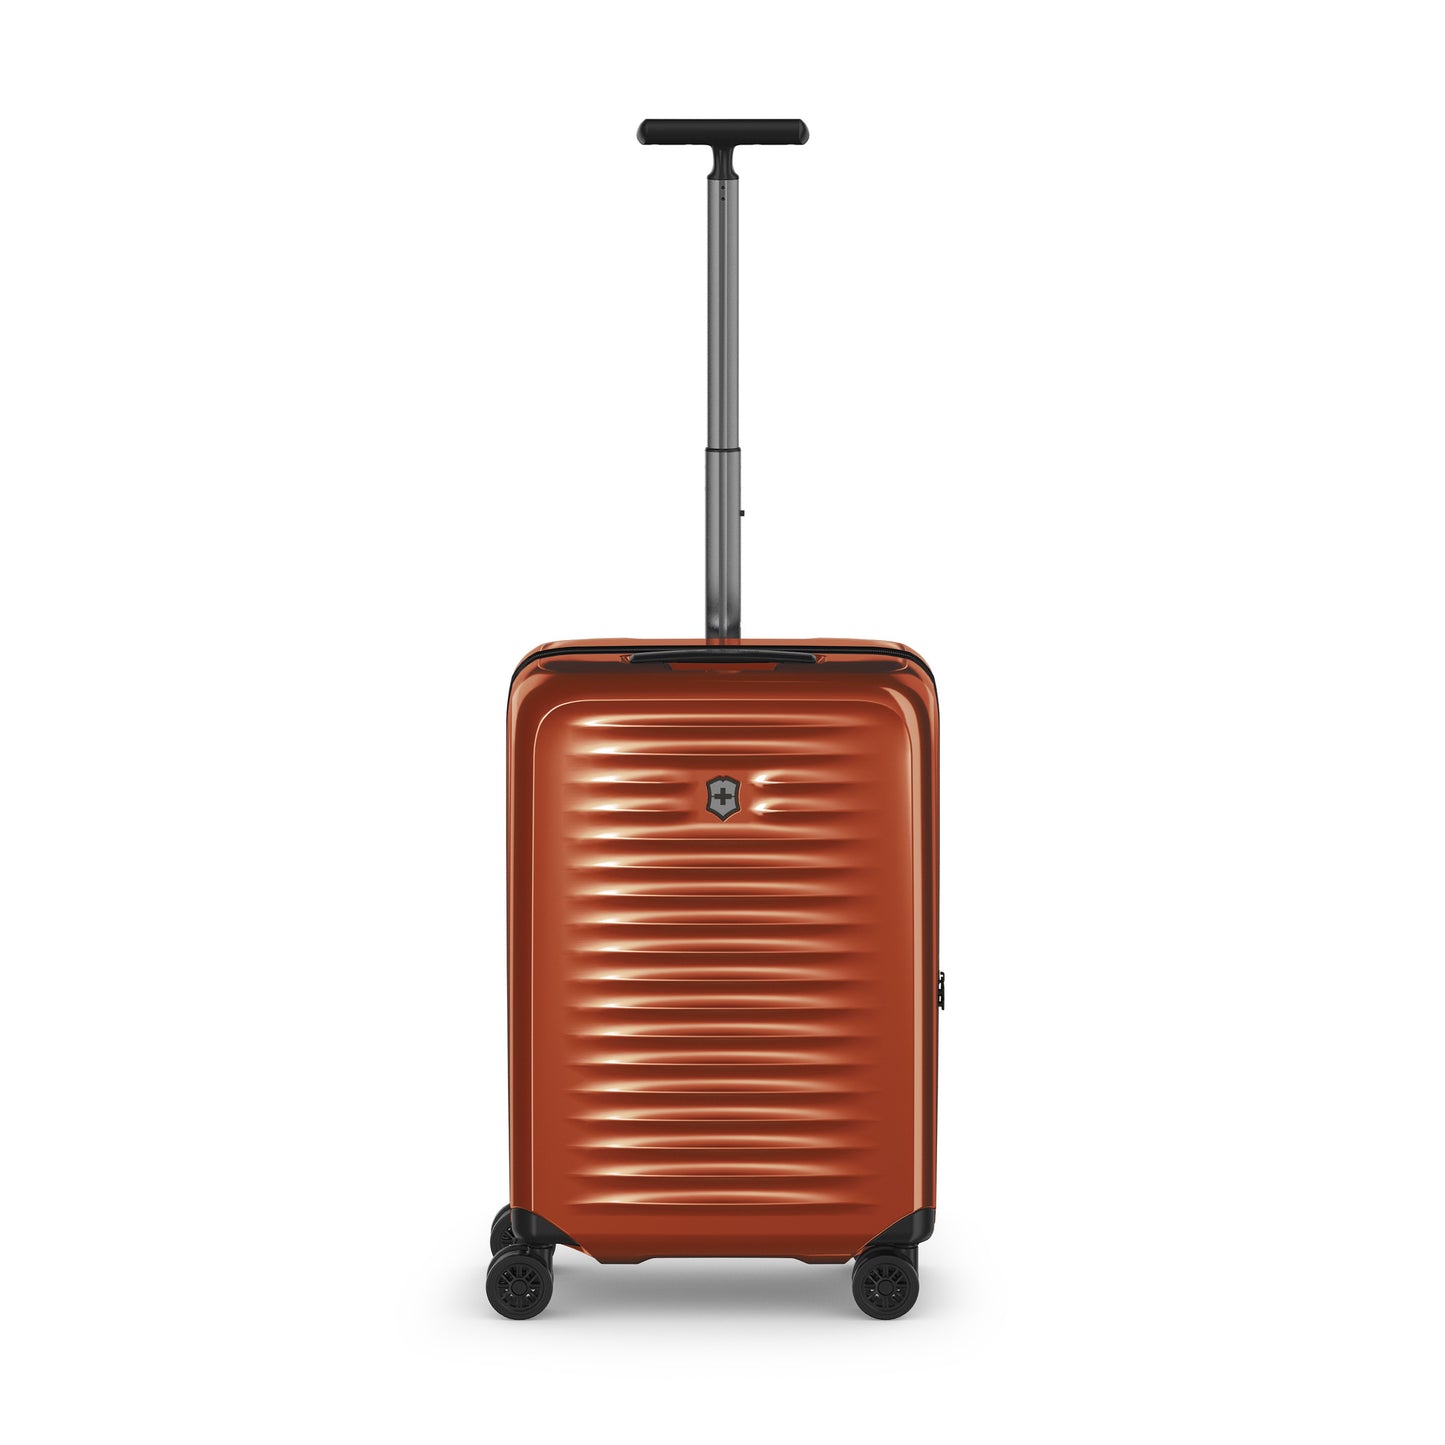 On Sale - Victorinox AIROX Hardside Carry-On+ (PLUS- 22.8 inch) Spinner